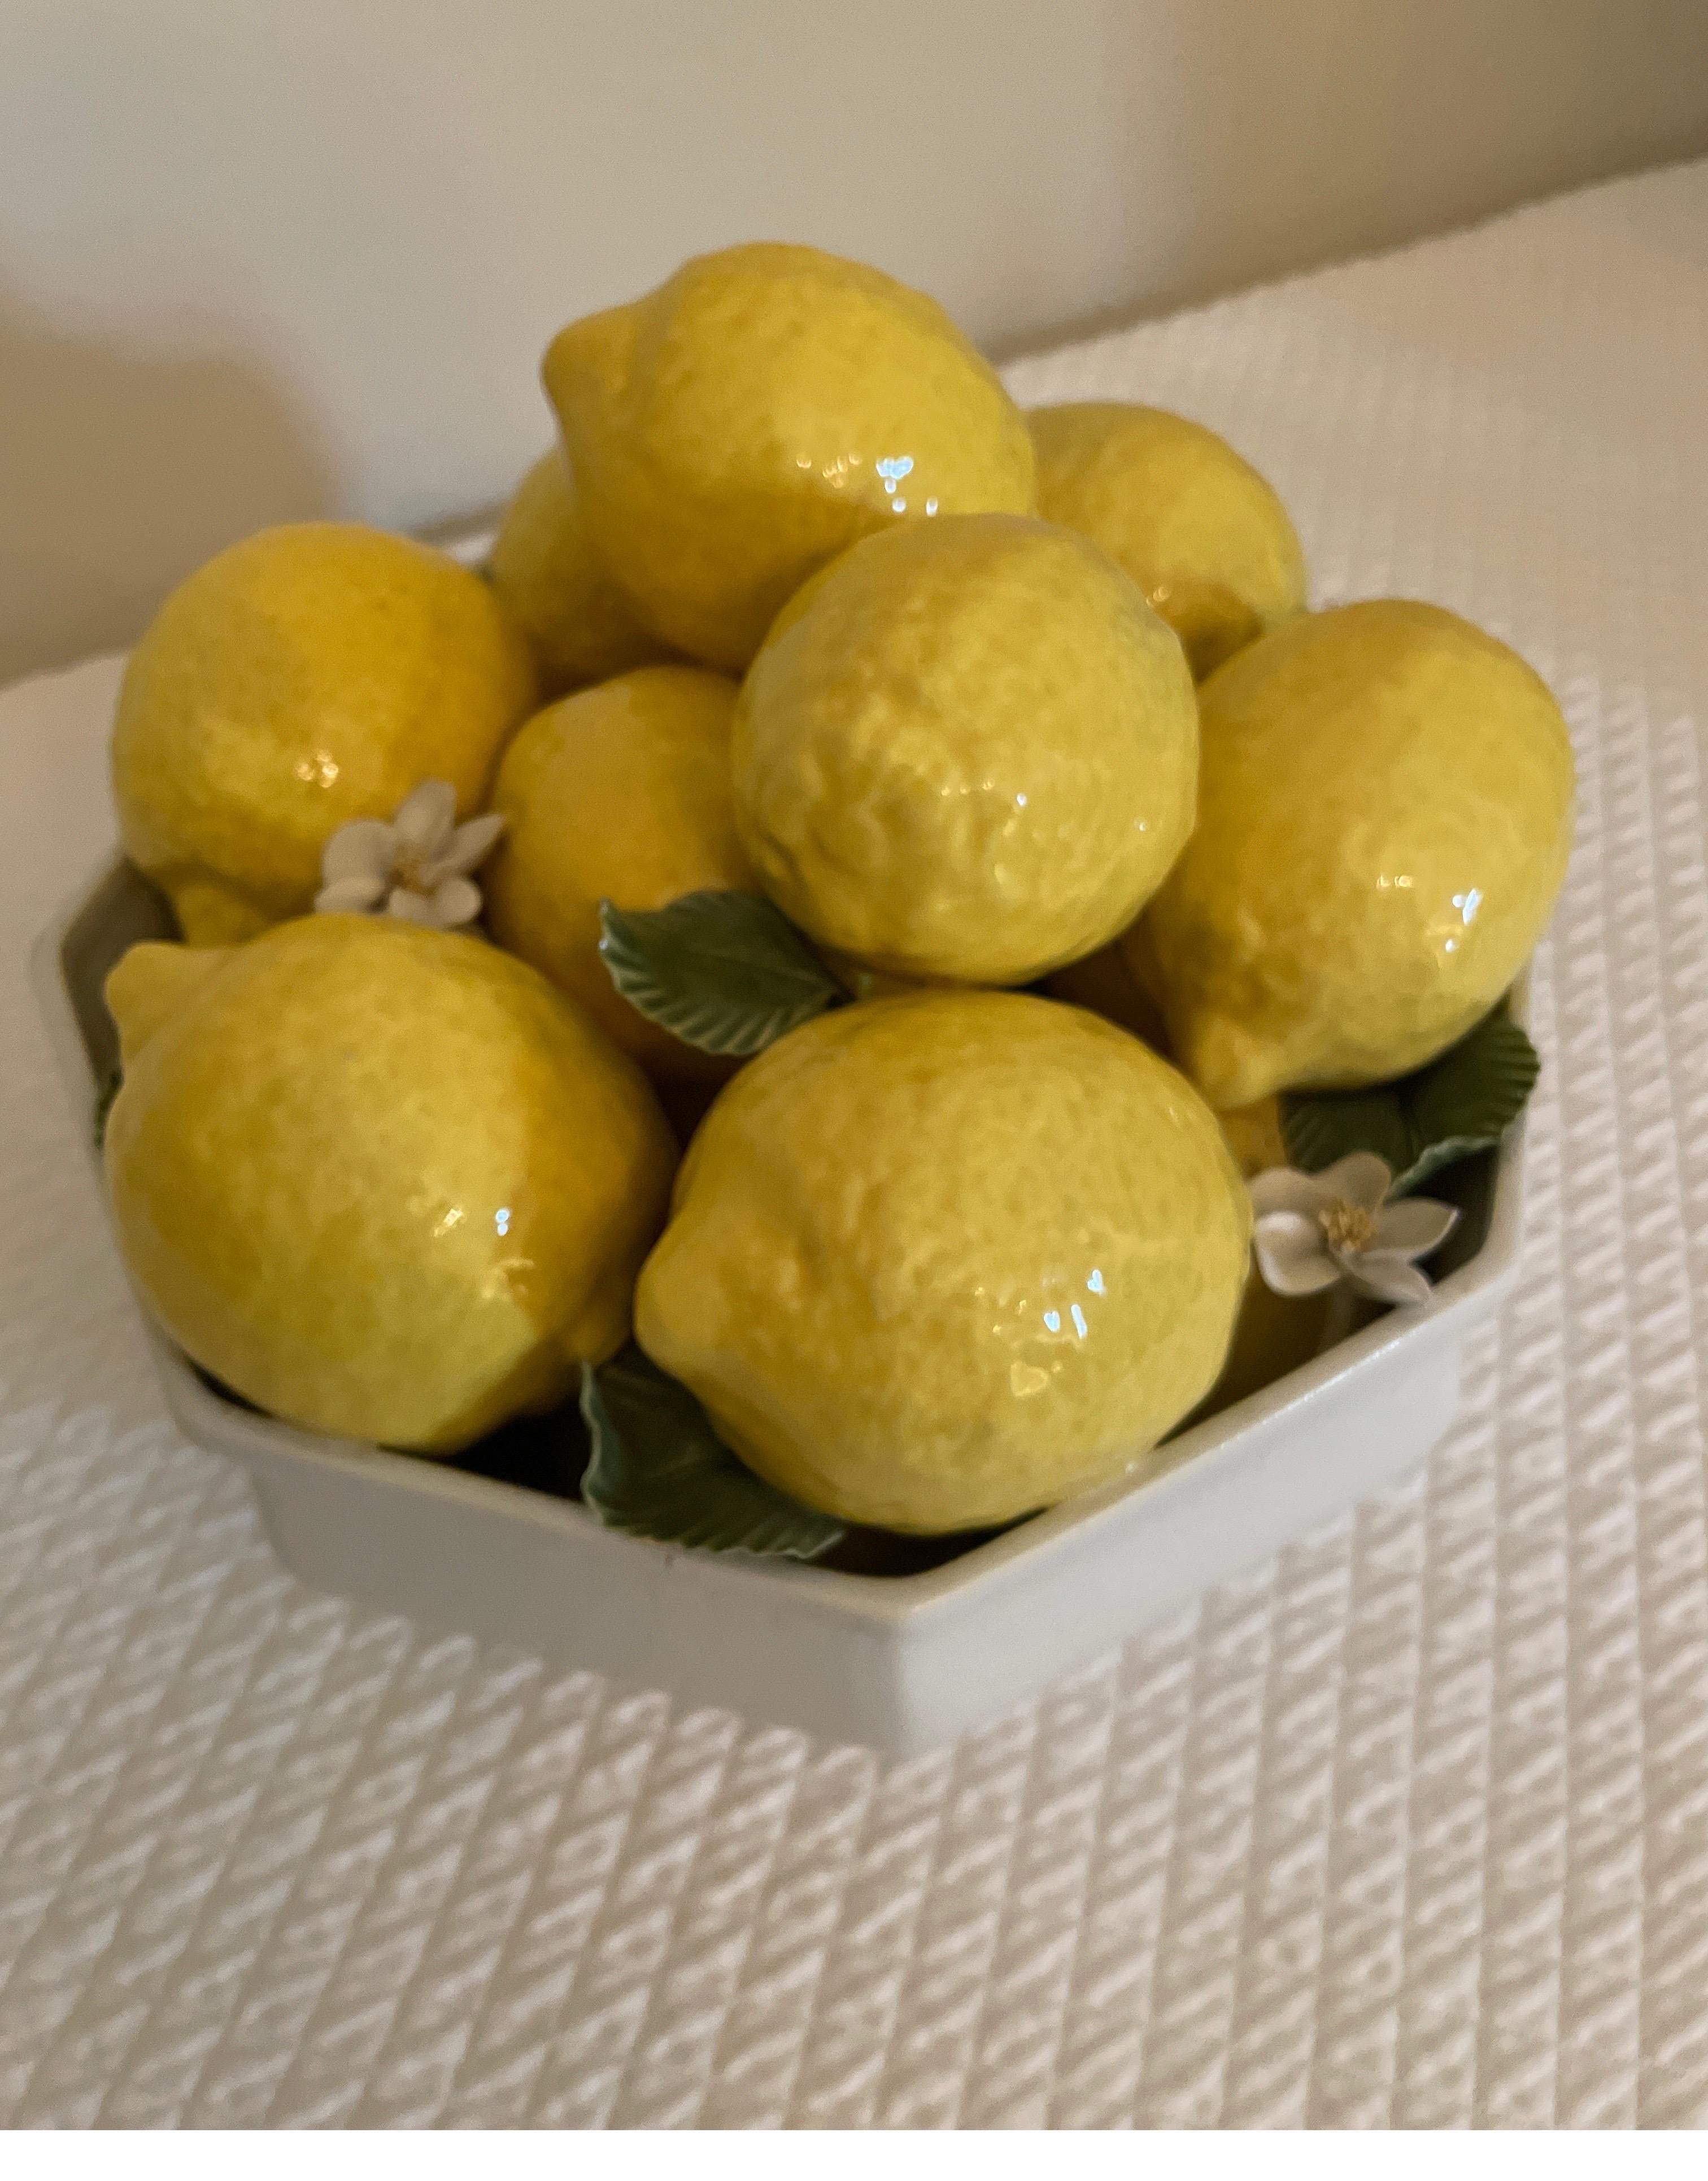 Vintage Italian Lemon centerpiece. White porcelain bowl filled with lemons & green leaves with white flower petals. Very pretty centerpiece for your table or buffet.